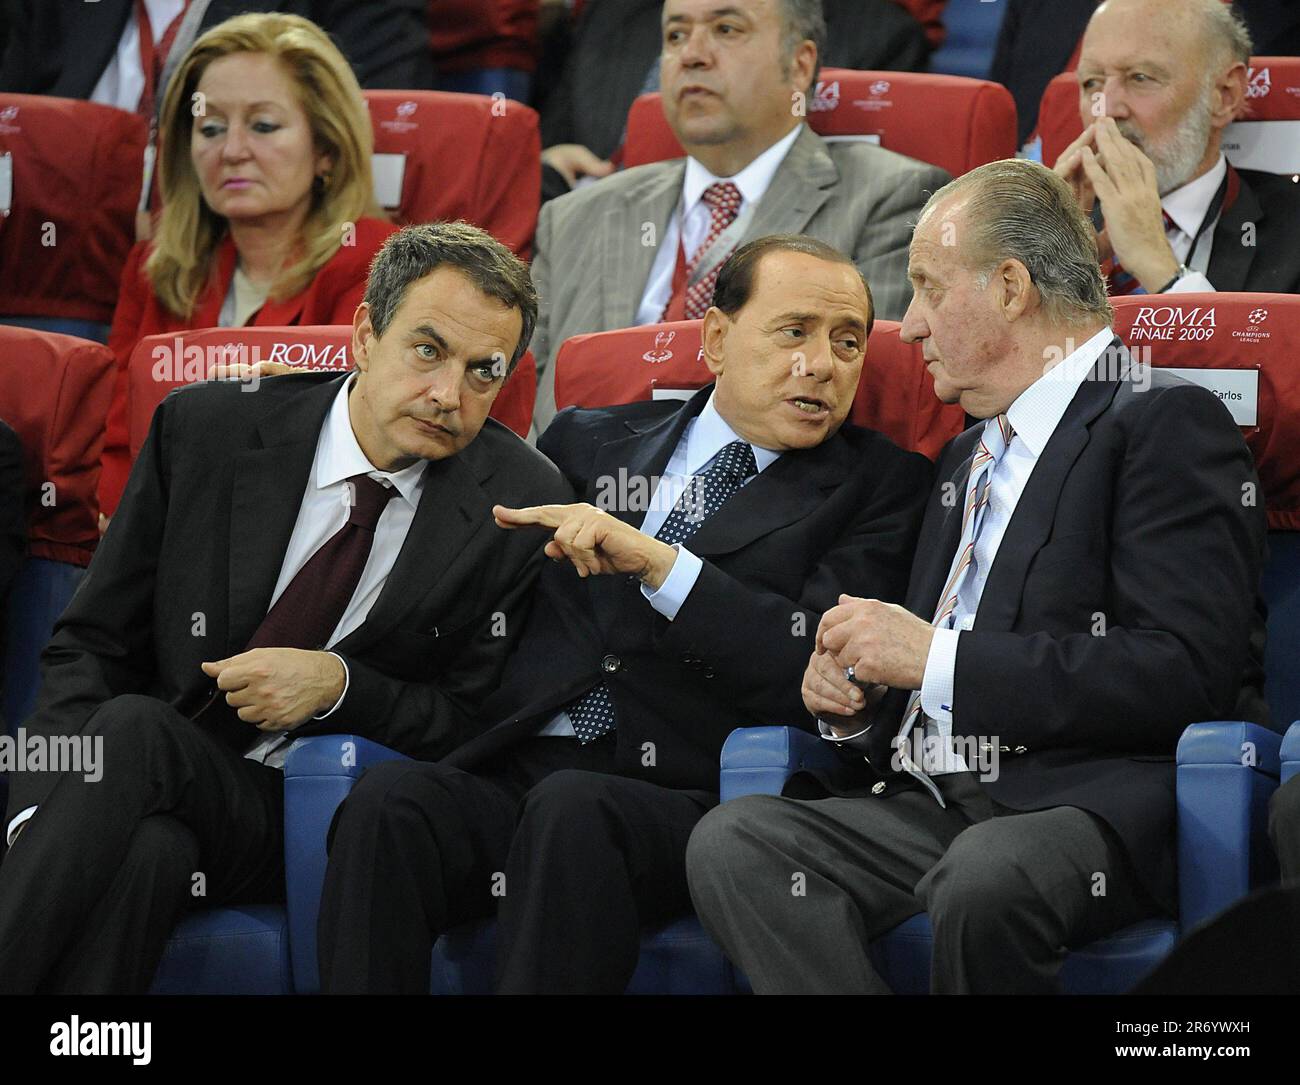 File photo dated 27/05/09 of former Italian Prime Minister Silvio Berlusconi who died on Monday aged 86, shown here talking to Spain's (now former) Prime Minister Jose Luis Rodriguez Zapatero (left) and (now former)King Juan Carlos (right) of Spain at UEFA Champions League Final between Barcelona and Manchester United at Stadio Olimpico in Rome, Italy. Stock Photo